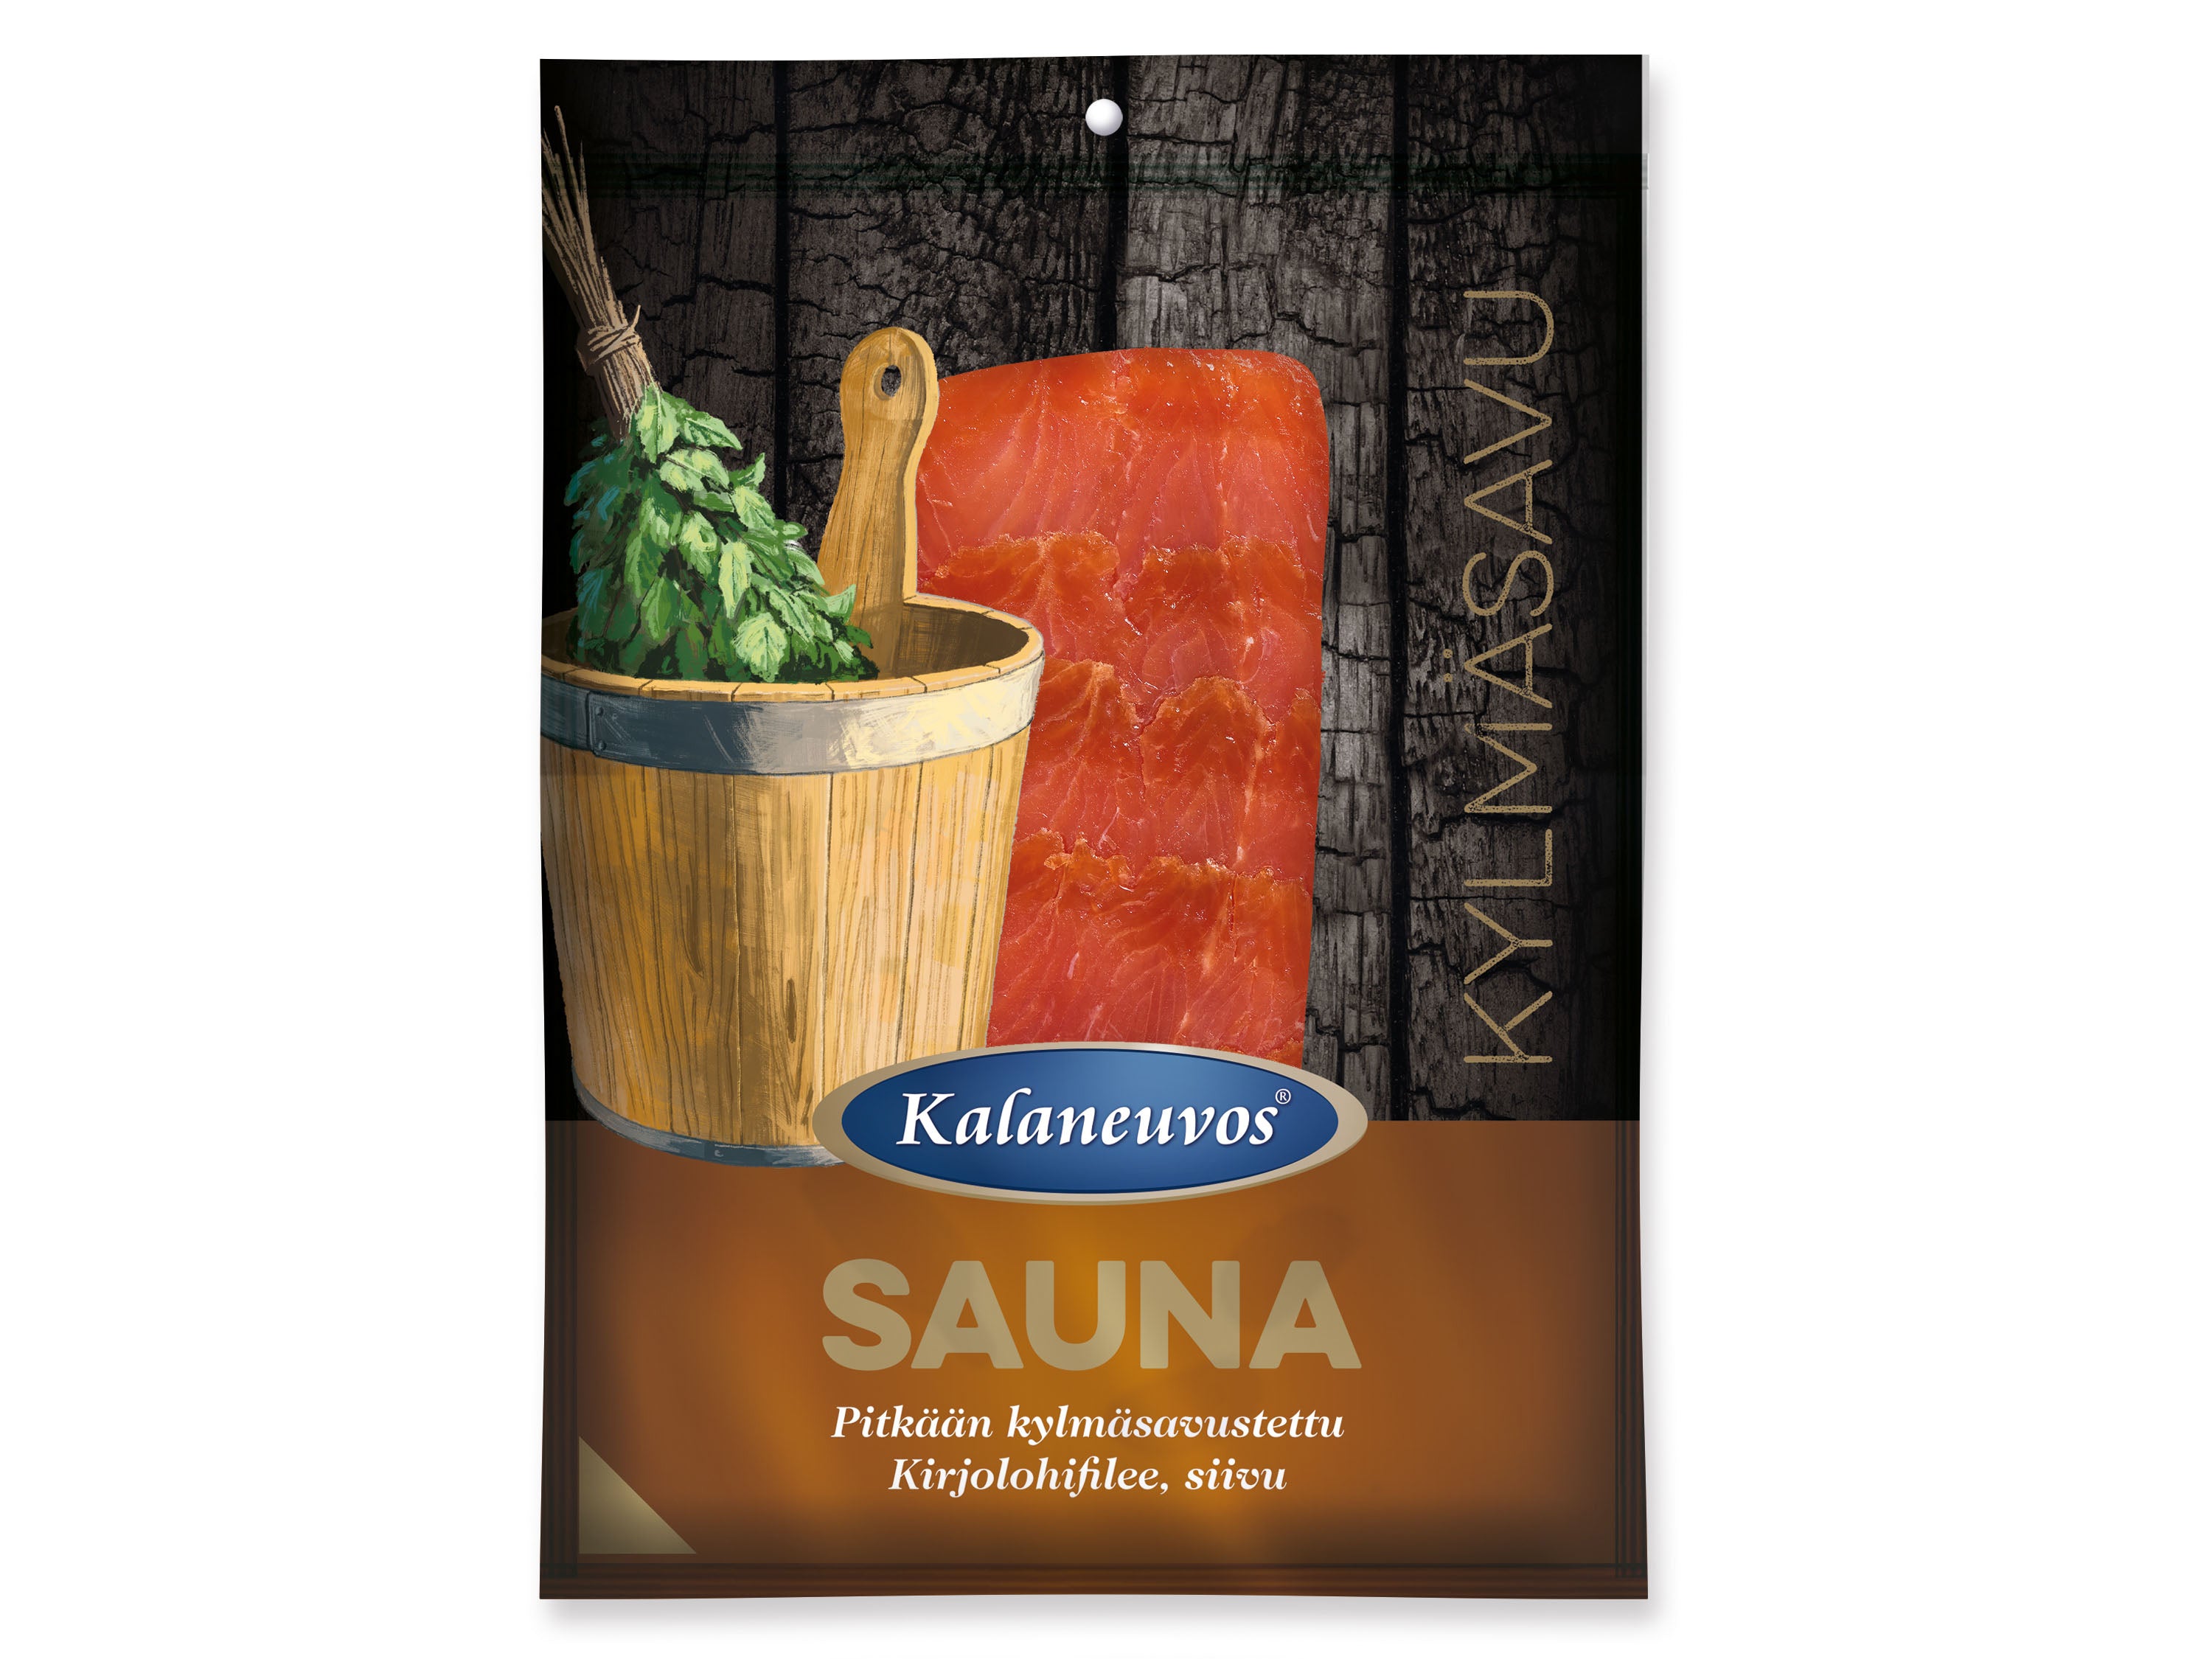 "Sauna" Cold-Smoked Nordic Rainbow Trout (Ready To Eat)